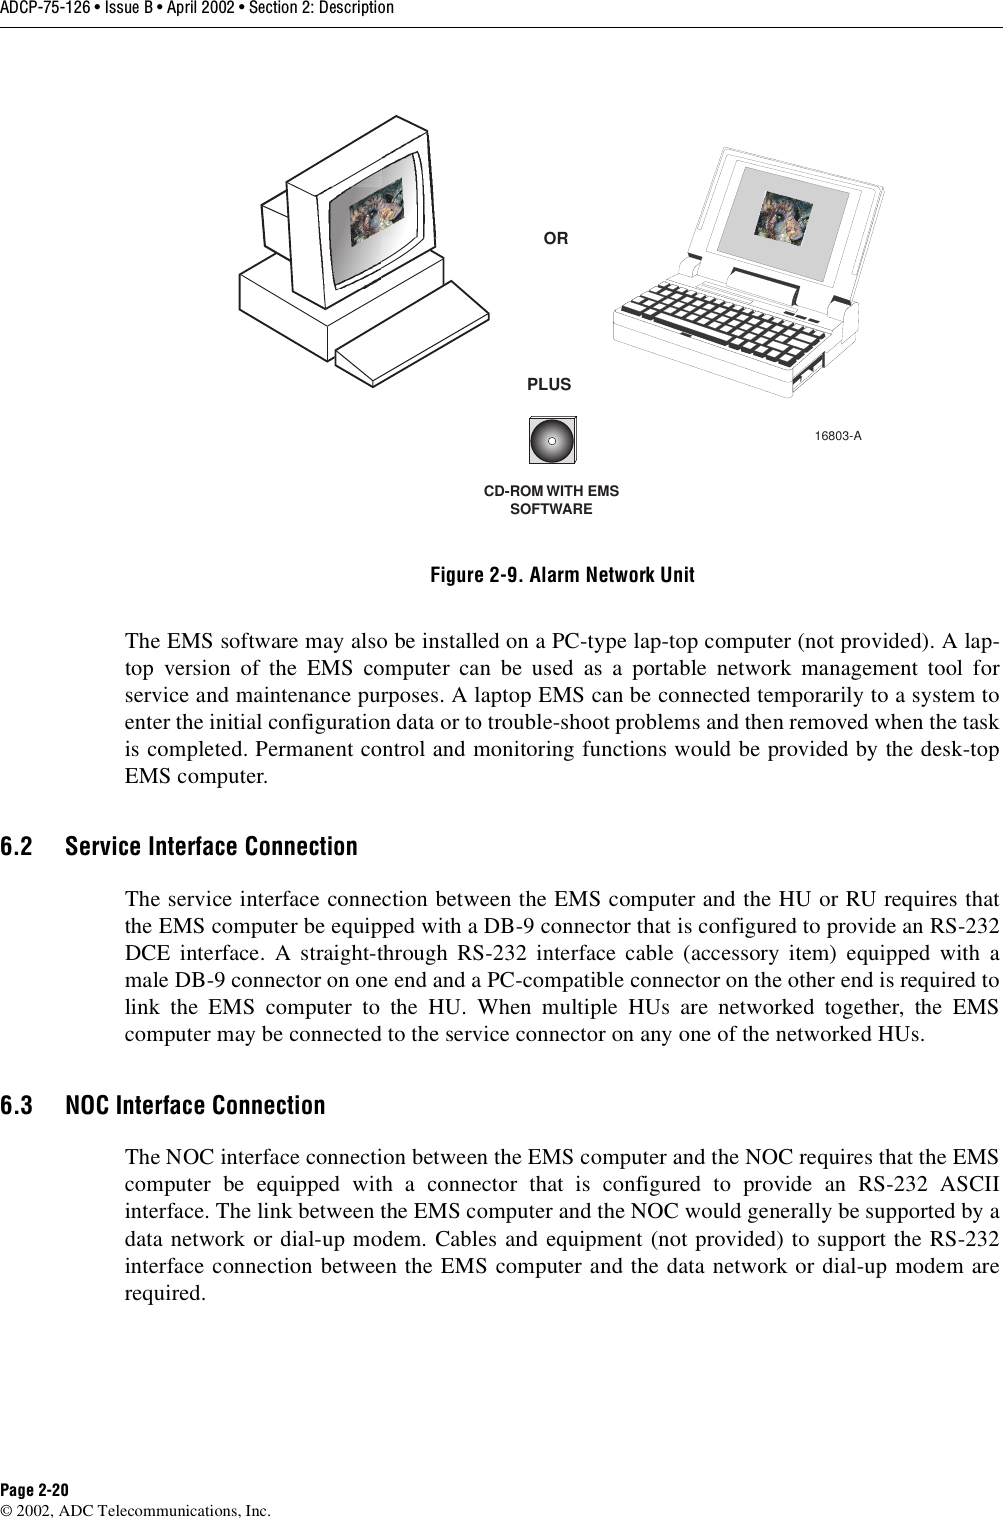 ADCP-75-126 • Issue B • April 2002 • Section 2: DescriptionPage 2-20©2002, ADC Telecommunications, Inc.Figure 2-9. Alarm Network UnitThe EMS software may also be installed on aPC-type lap-top computer (not provided). Alap-top version of the EMS computer can be used as aportable network management tool forservice and maintenance purposes. Alaptop EMS can be connected temporarily to asystem toenter the initial configuration data or to trouble-shoot problems and then removed when the taskis completed. Permanent control and monitoring functions would be provided by the desk-topEMS computer.6.2 Service Interface ConnectionThe service interface connection between the EMS computer and the HU or RU requires thatthe EMS computer be equipped with aDB-9 connector that is configured to provide an RS-232DCE interface. Astraight-through RS-232 interface cable (accessory item) equipped with amale DB-9 connector on one end and aPC-compatible connector on the other end is required tolink the EMS computer to the HU. When multiple HUs are networked together, the EMScomputer may be connected to the service connector on any one of the networked HUs.6.3 NOC Interface ConnectionThe NOC interface connection between the EMS computer and the NOC requires that the EMScomputer be equipped with aconnector that is configured to provide an RS-232 ASCIIinterface. The link between the EMS computer and the NOC would generally be supported by adata network or dial-up modem. Cables and equipment (not provided) to support the RS-232interface connection between the EMS computer and the data network or dial-up modem arerequired.CD-ROM WITH EMSSOFTWAREORPLUS16803-A